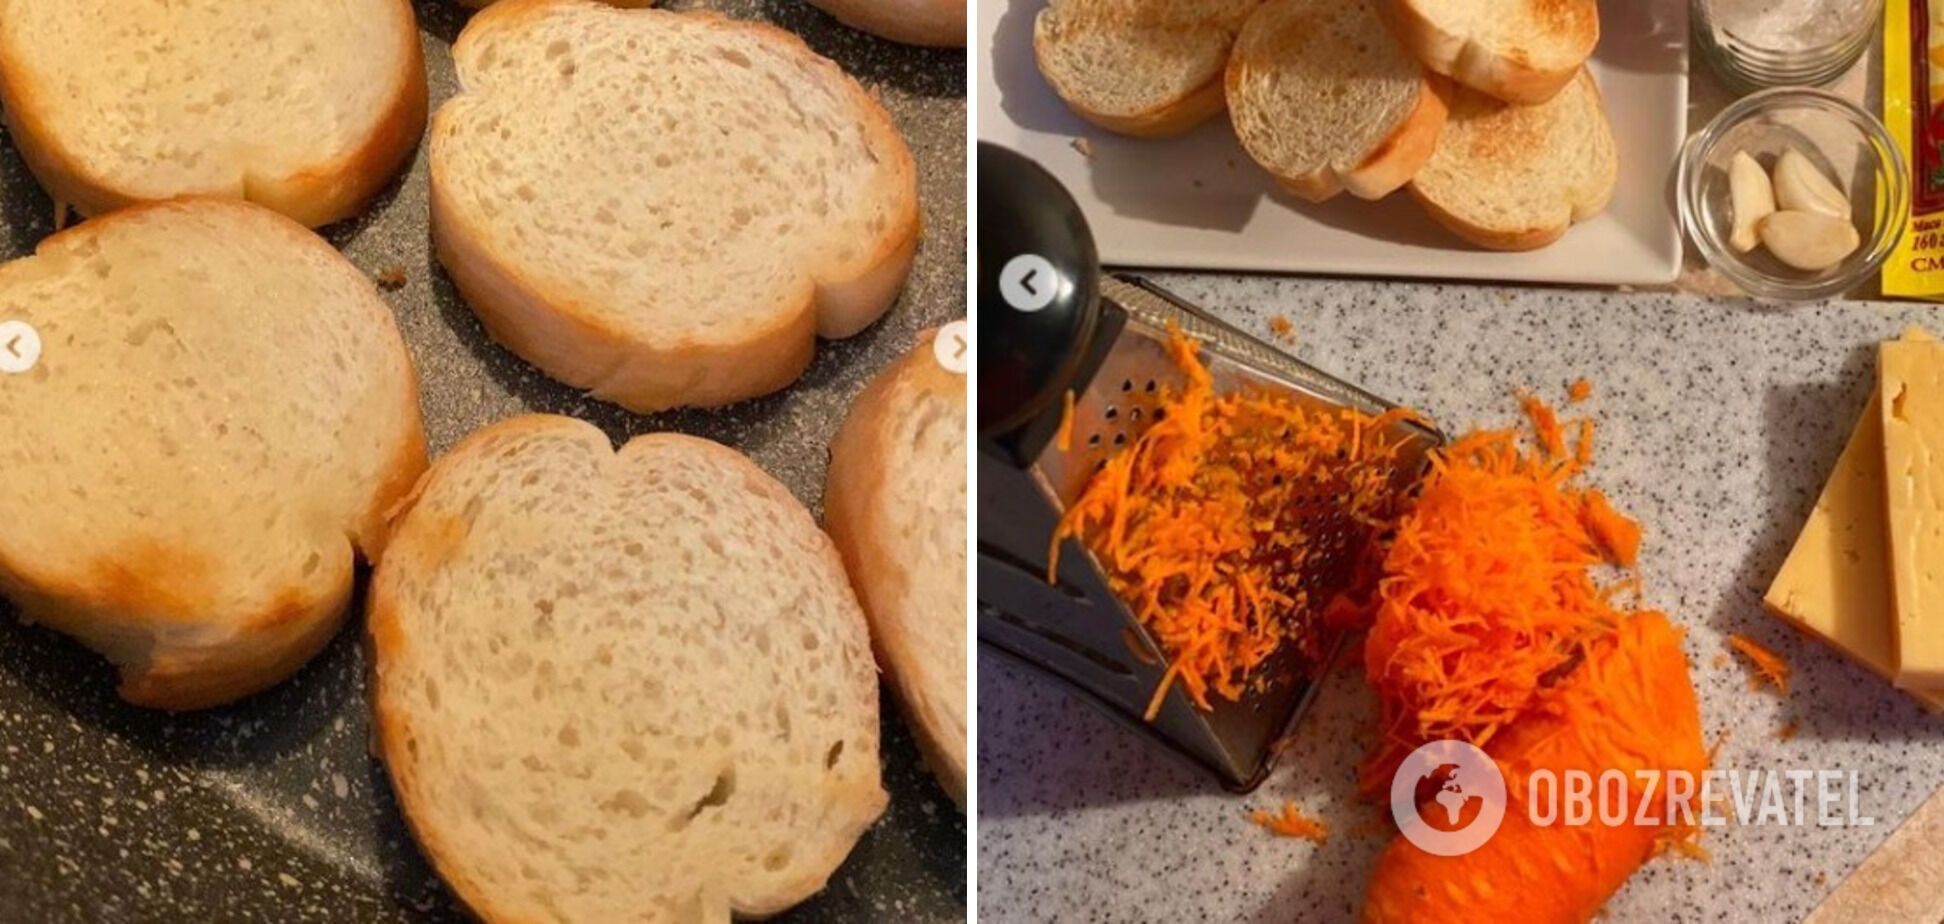 Hot sandwiches in a hurry without an oven